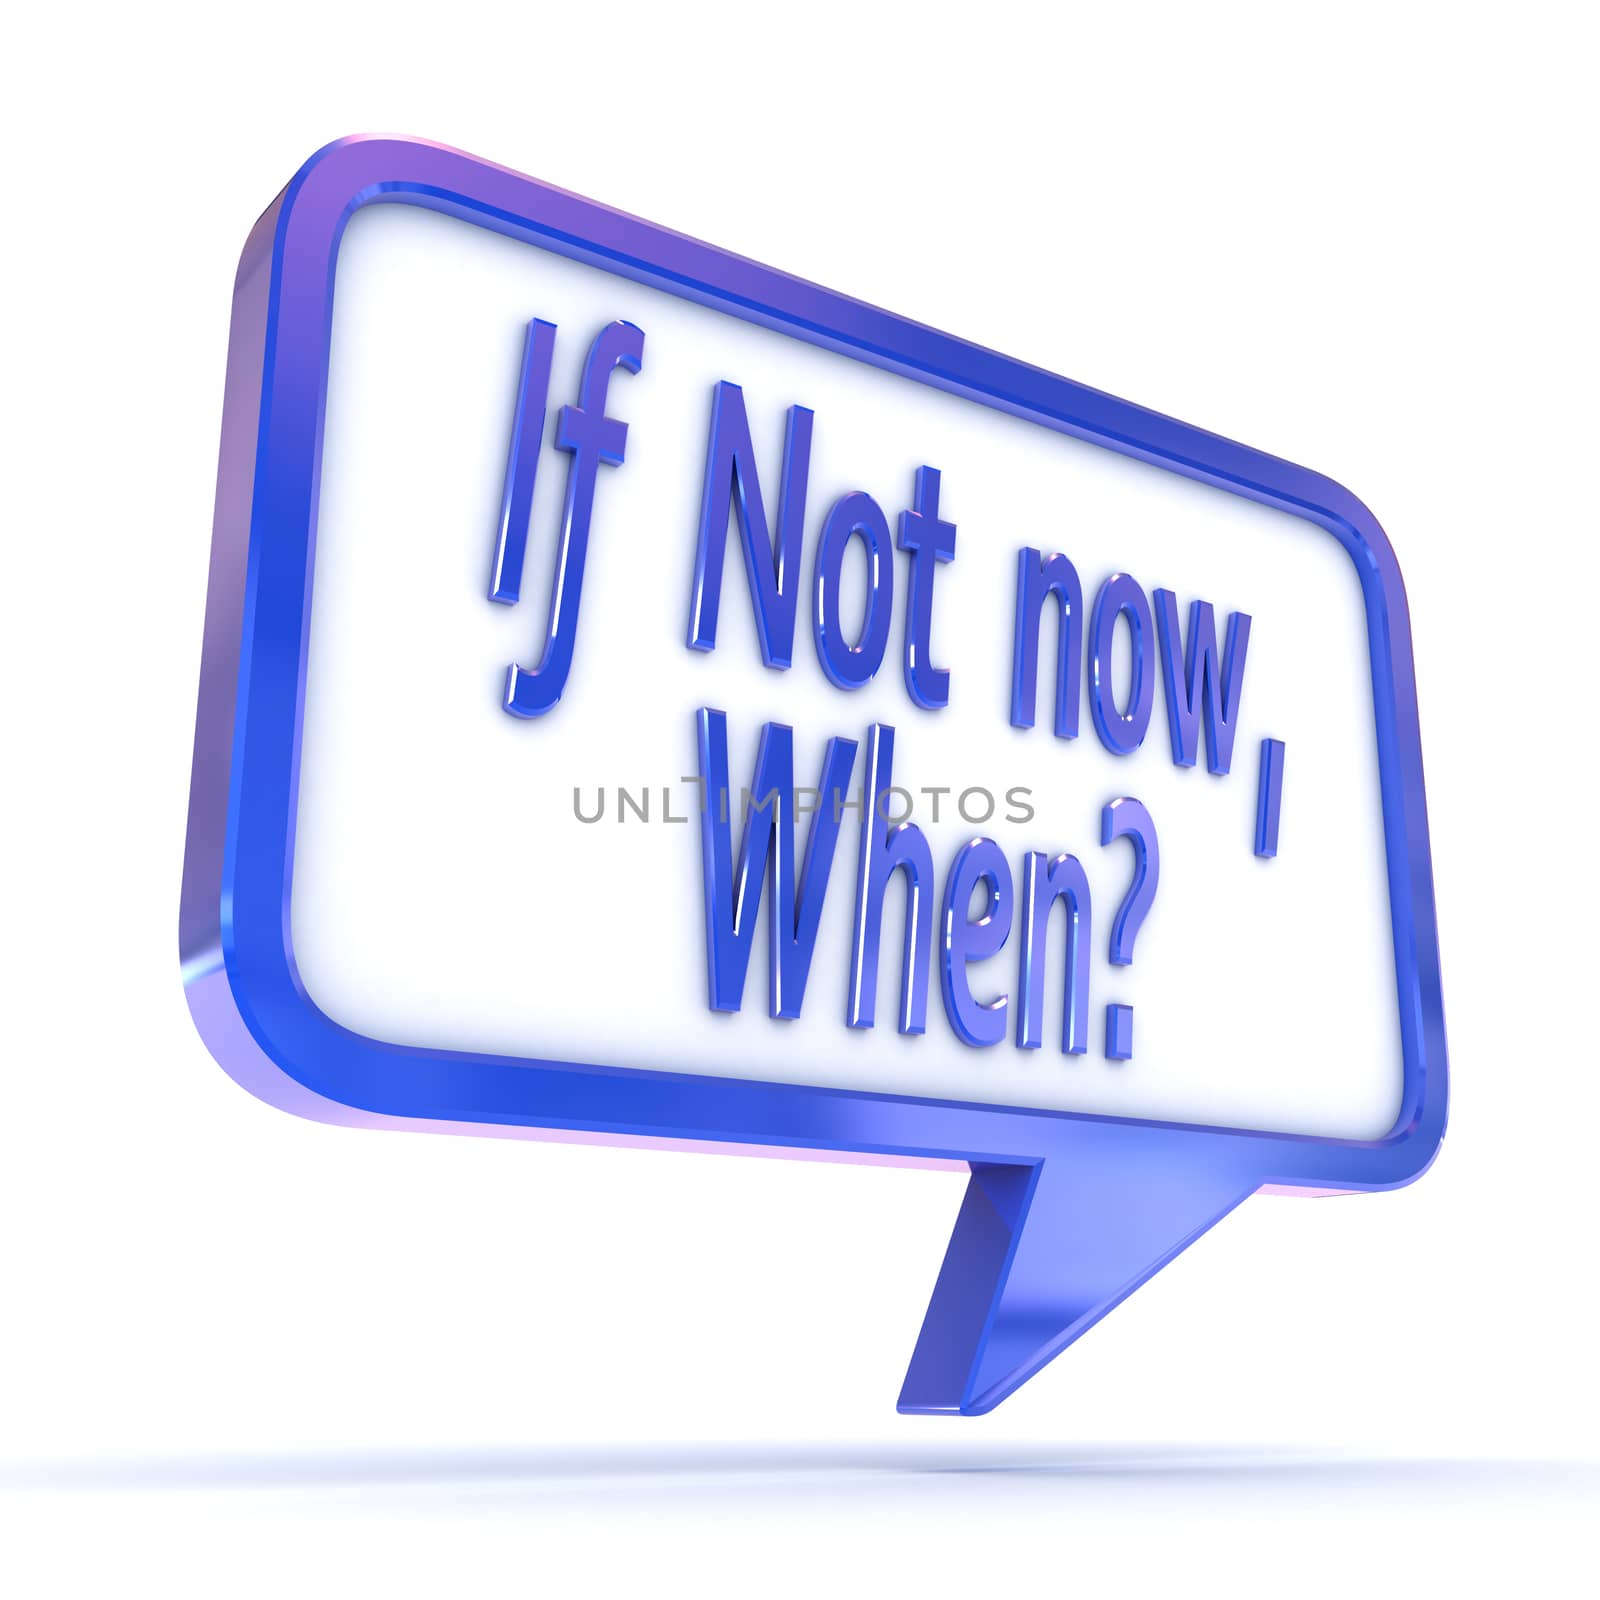 A Colourful 3d Rendered Concept Illustration showing "If not now, When?" writen in a Speech Bubble